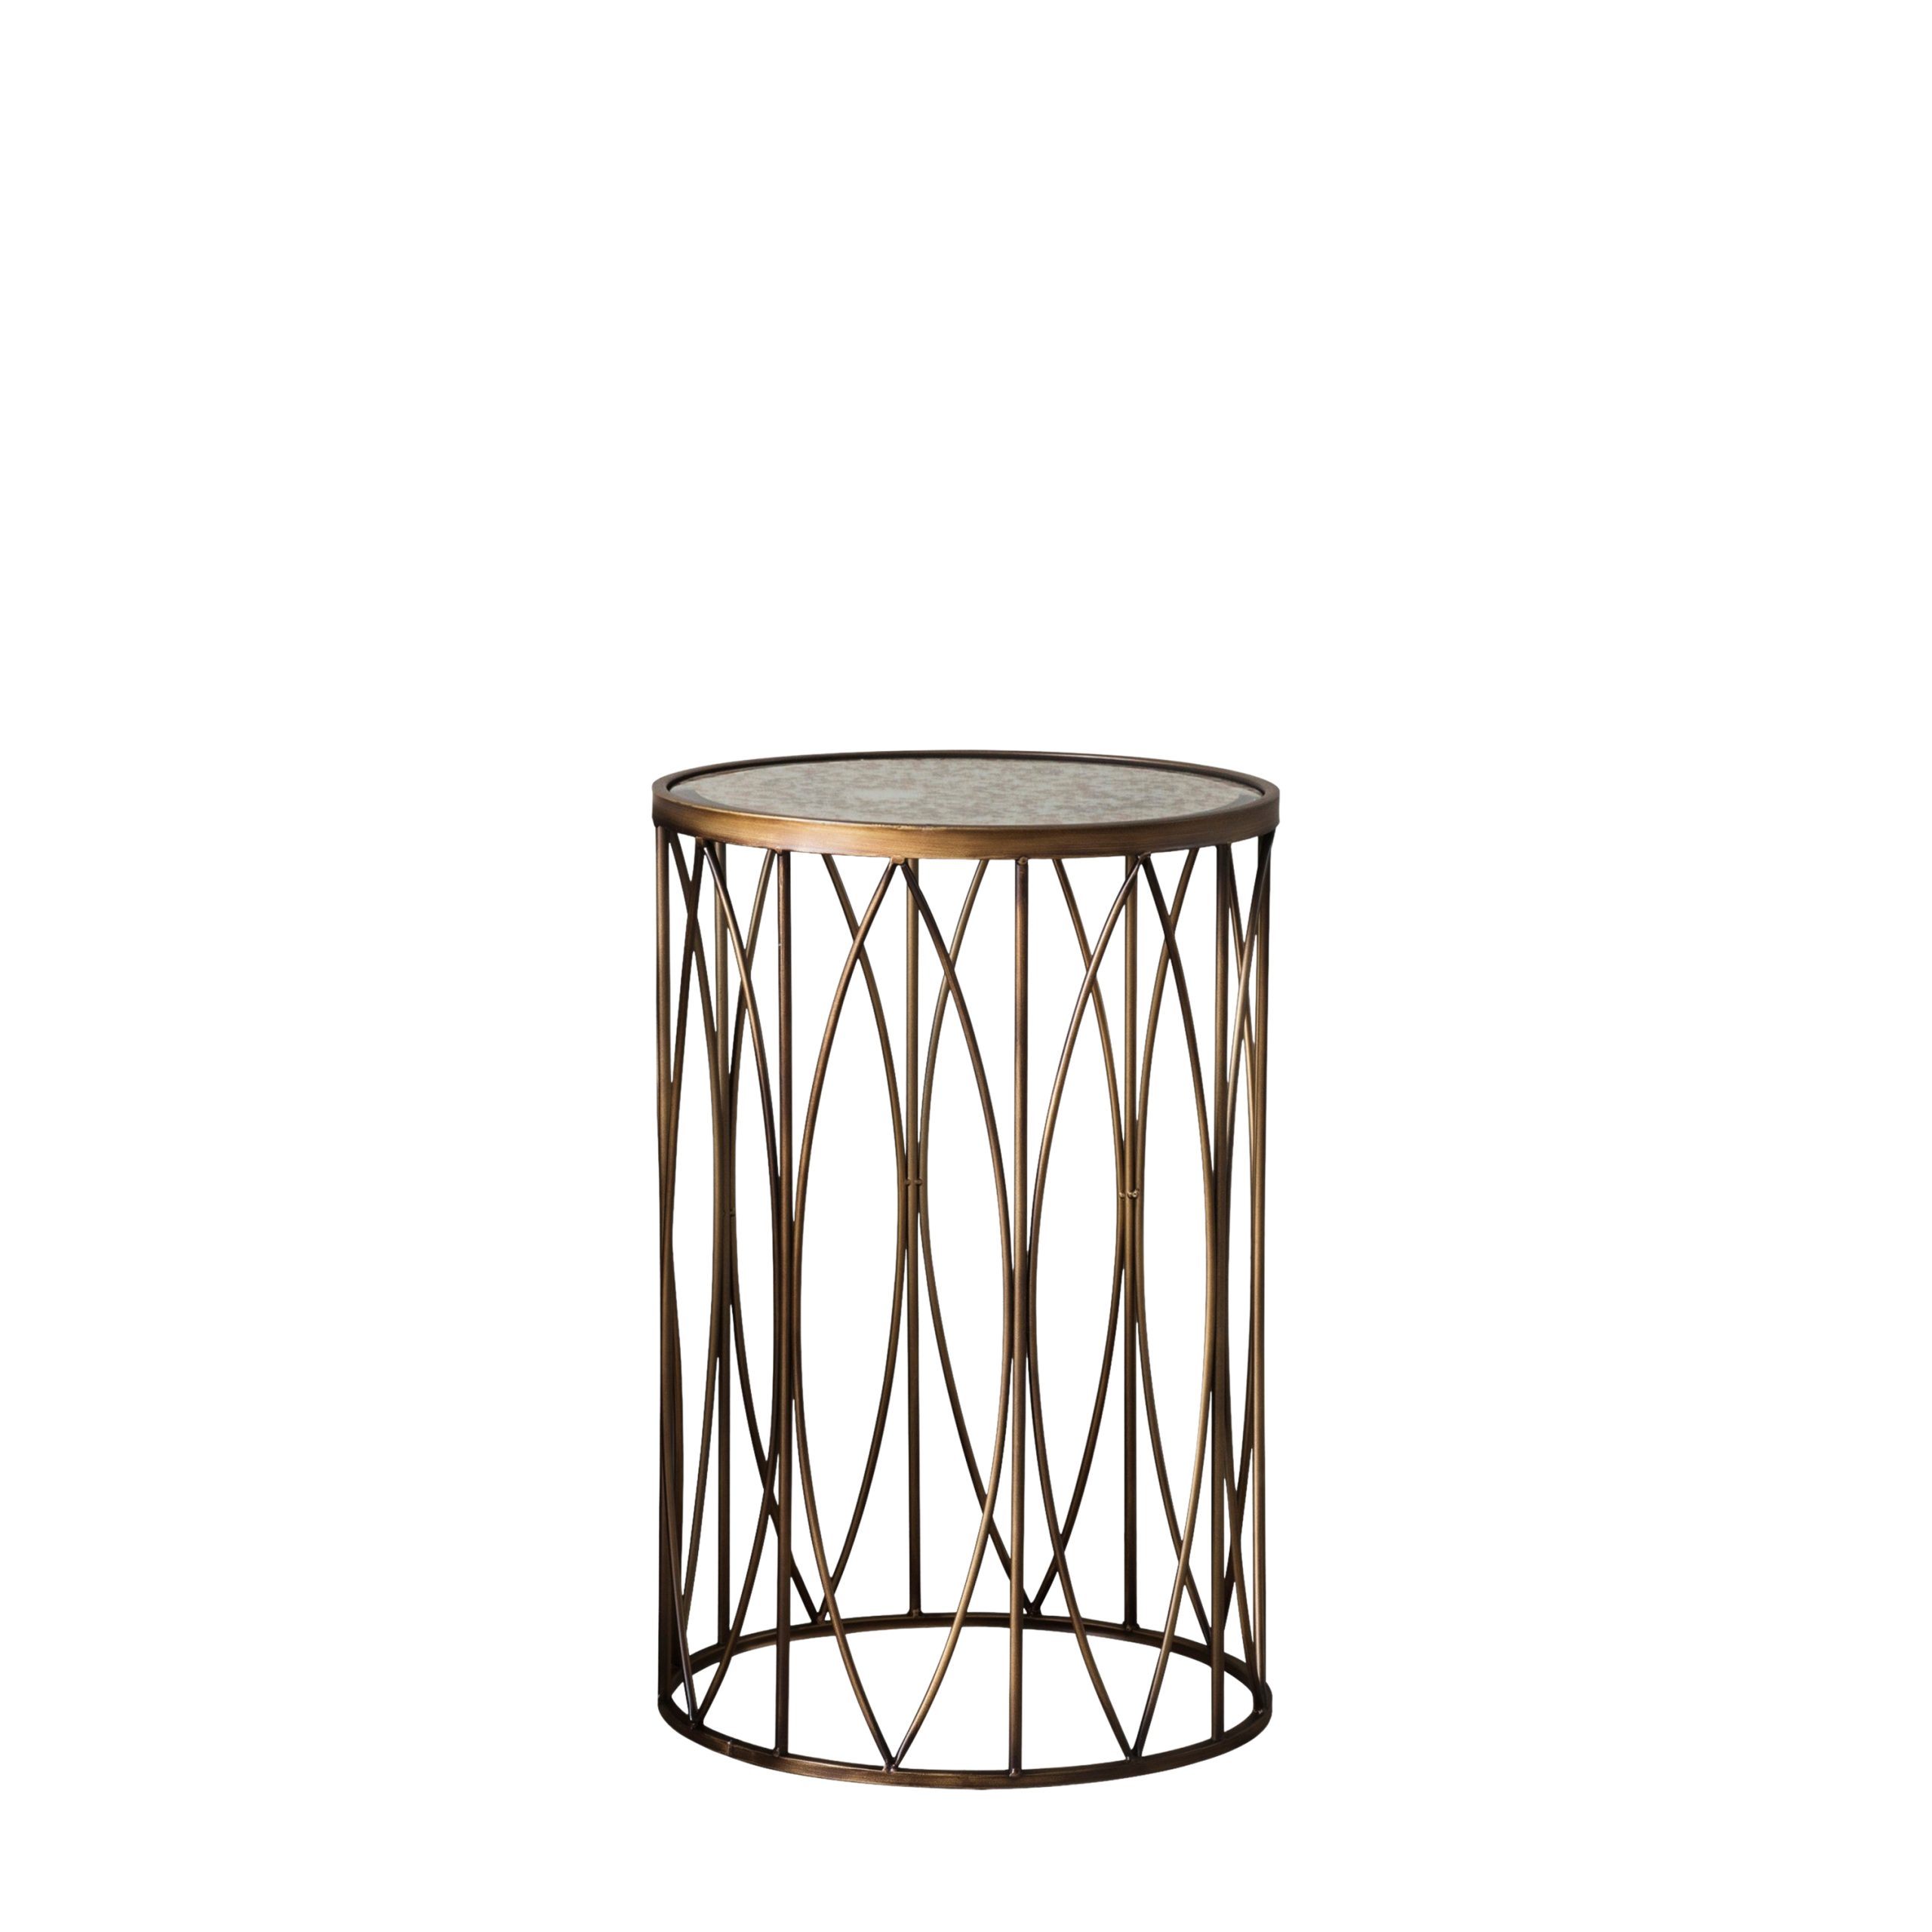 Gallery Direct Highgate SideTable